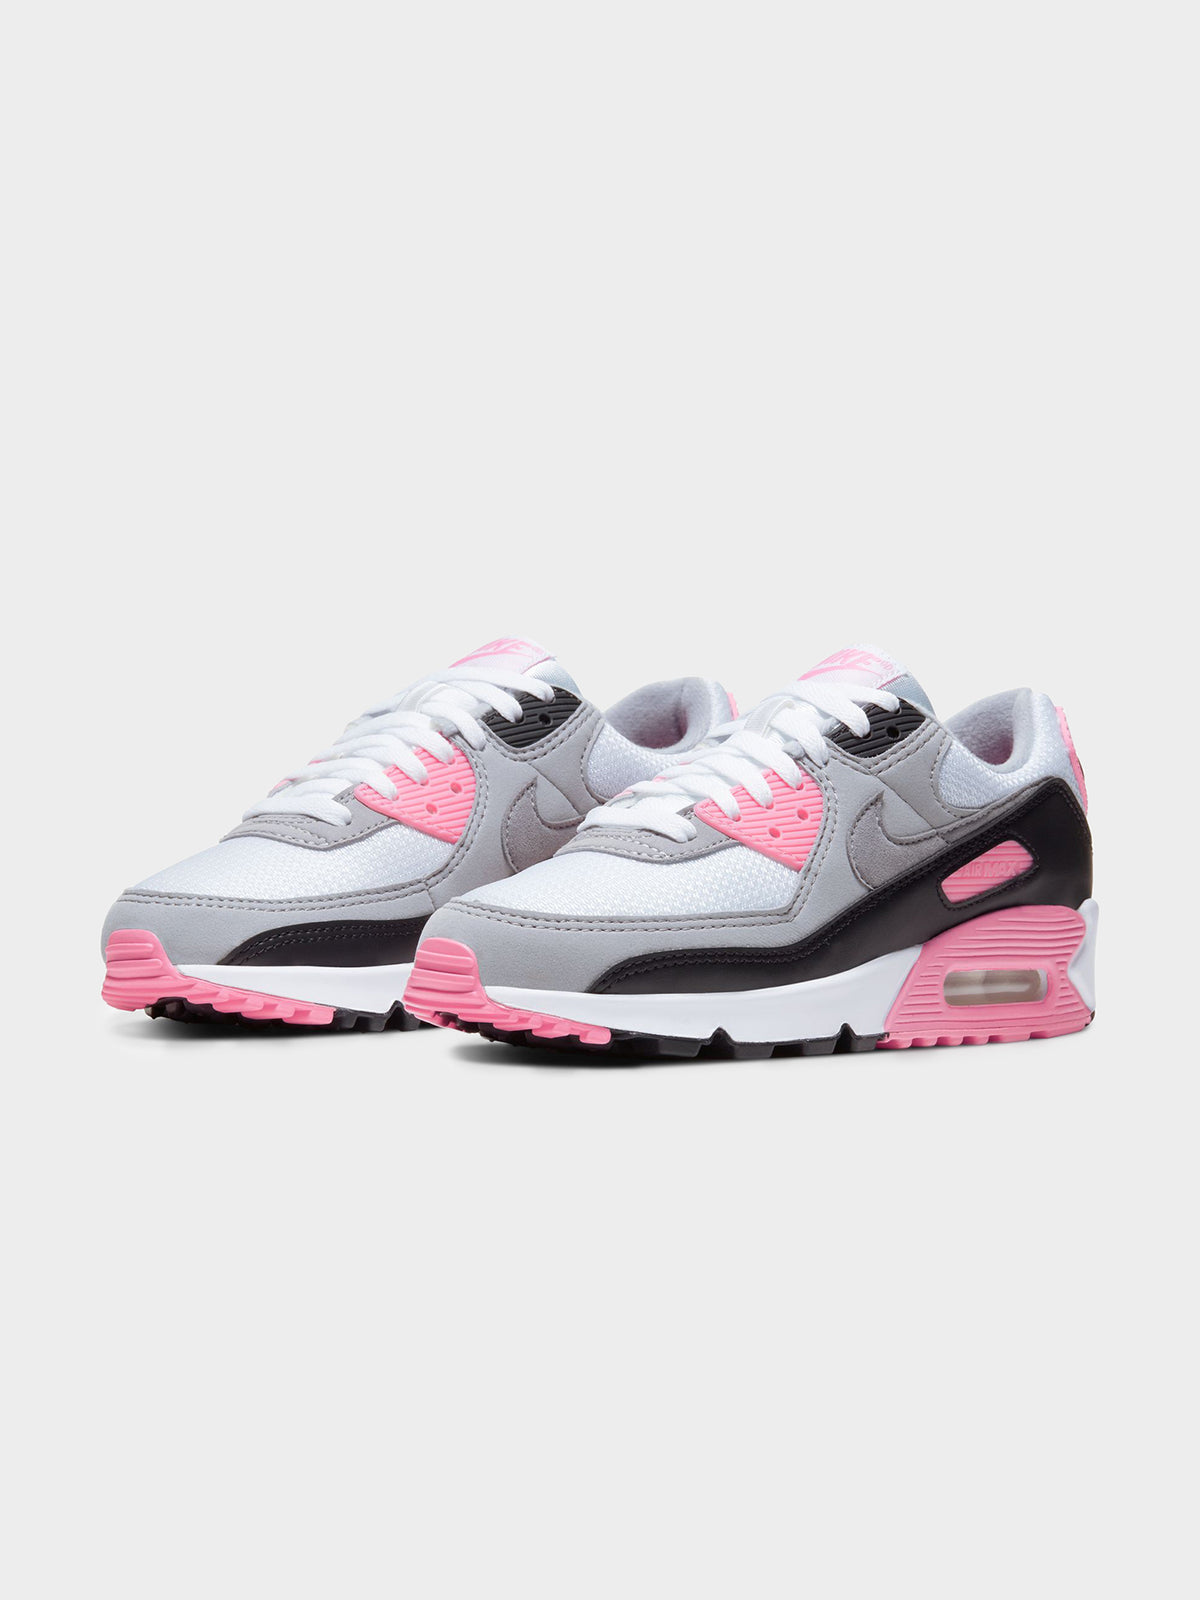 Womens Air Max 90 Sneakers in White, Grey &amp; Rose Pink